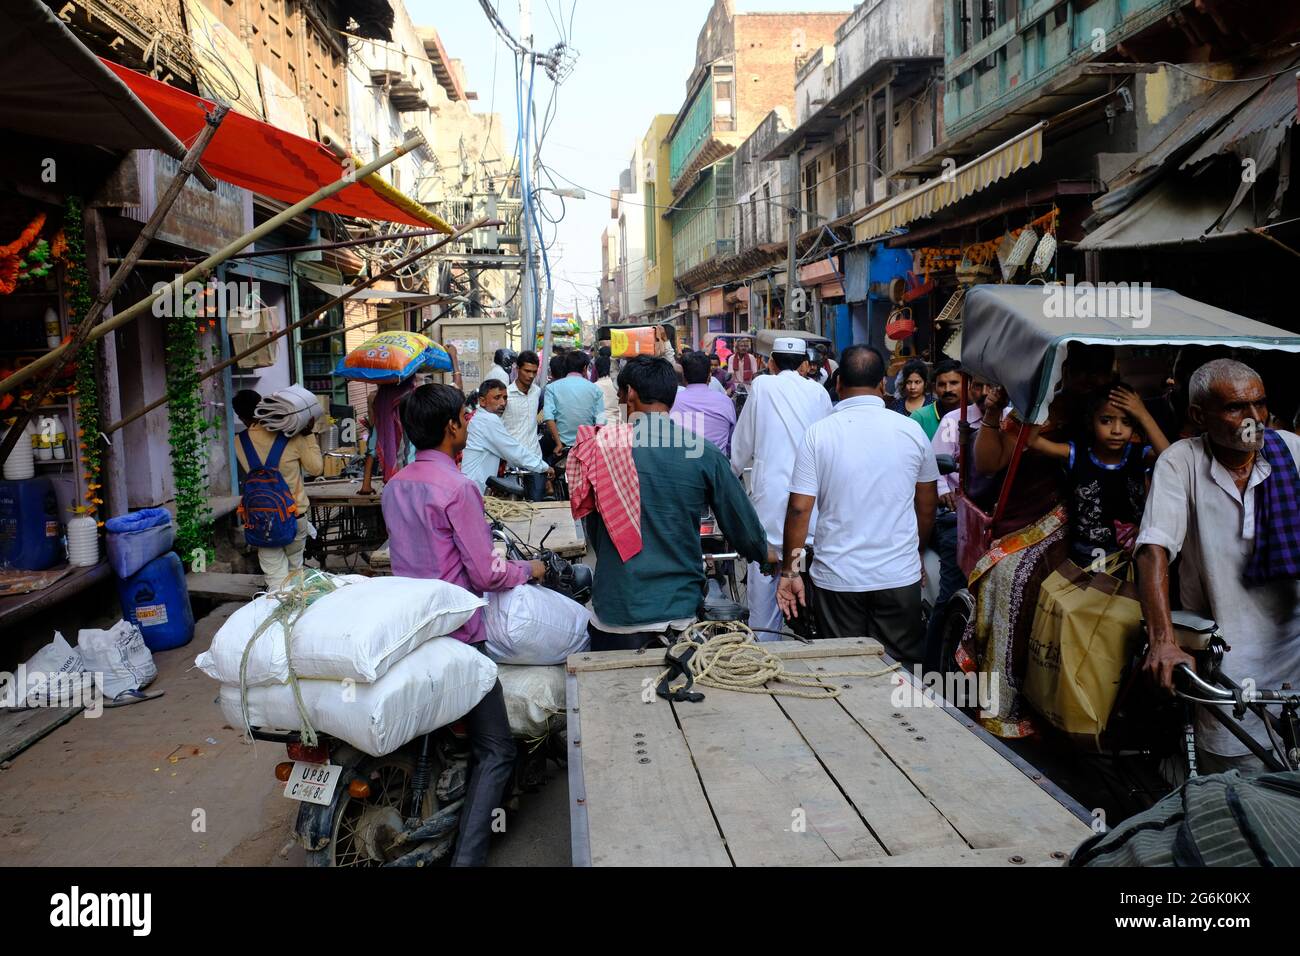 India Agra - Street view shopping and market places Stock Photo